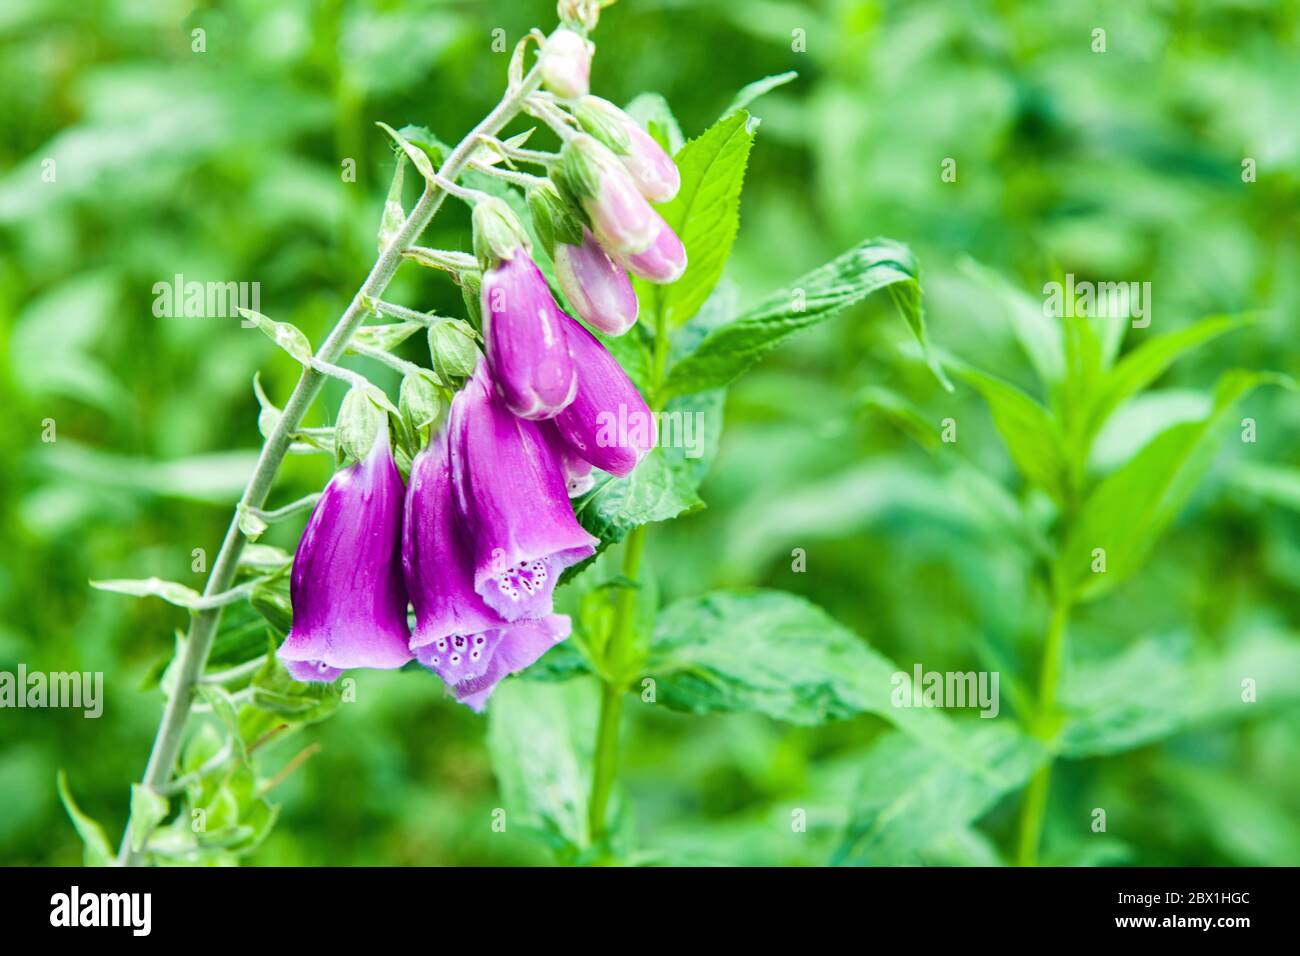 Foxgloves, or Digitalis purpurea, in a woodland local to the photographer. The wood was full of foxgloves, they grow prolifically and are loved by bee. Stock Photo